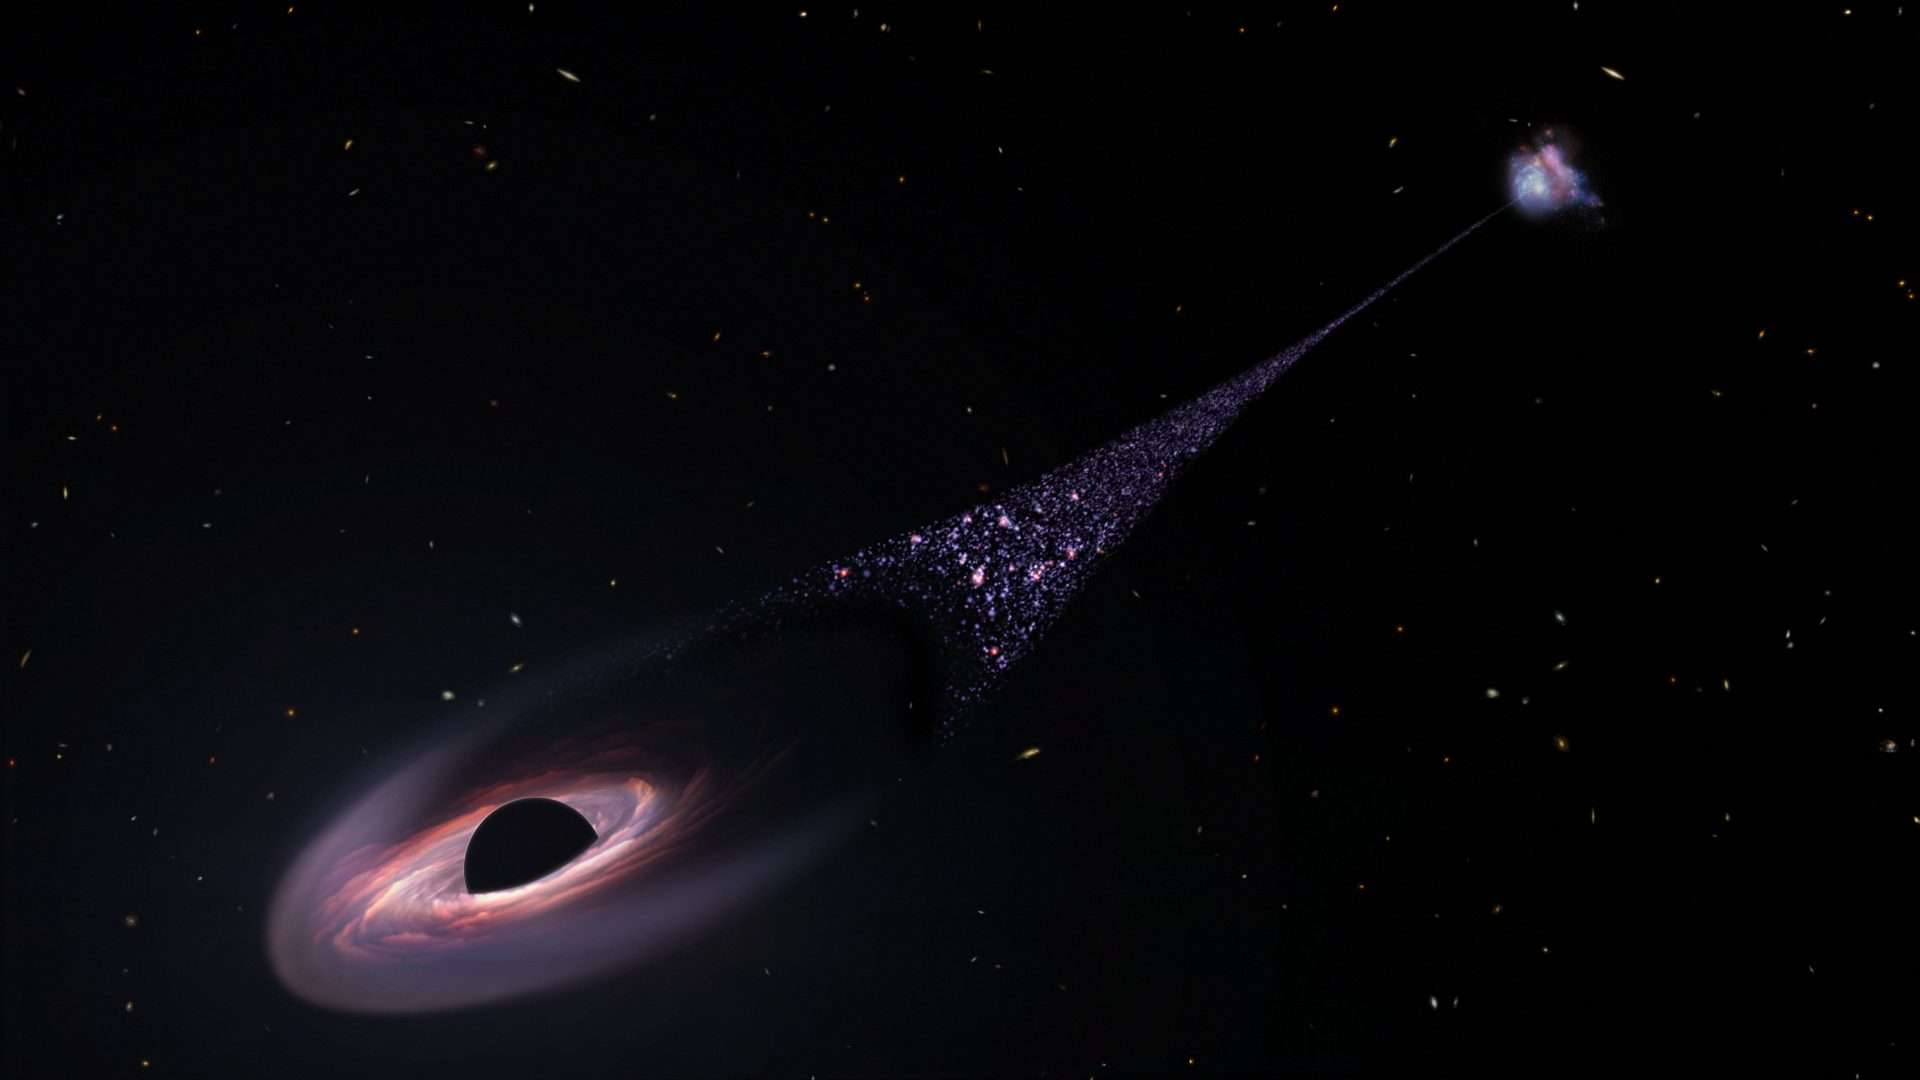 Hubble Sees a Possible Runaway Black Hole Creating a Trail of Stars 